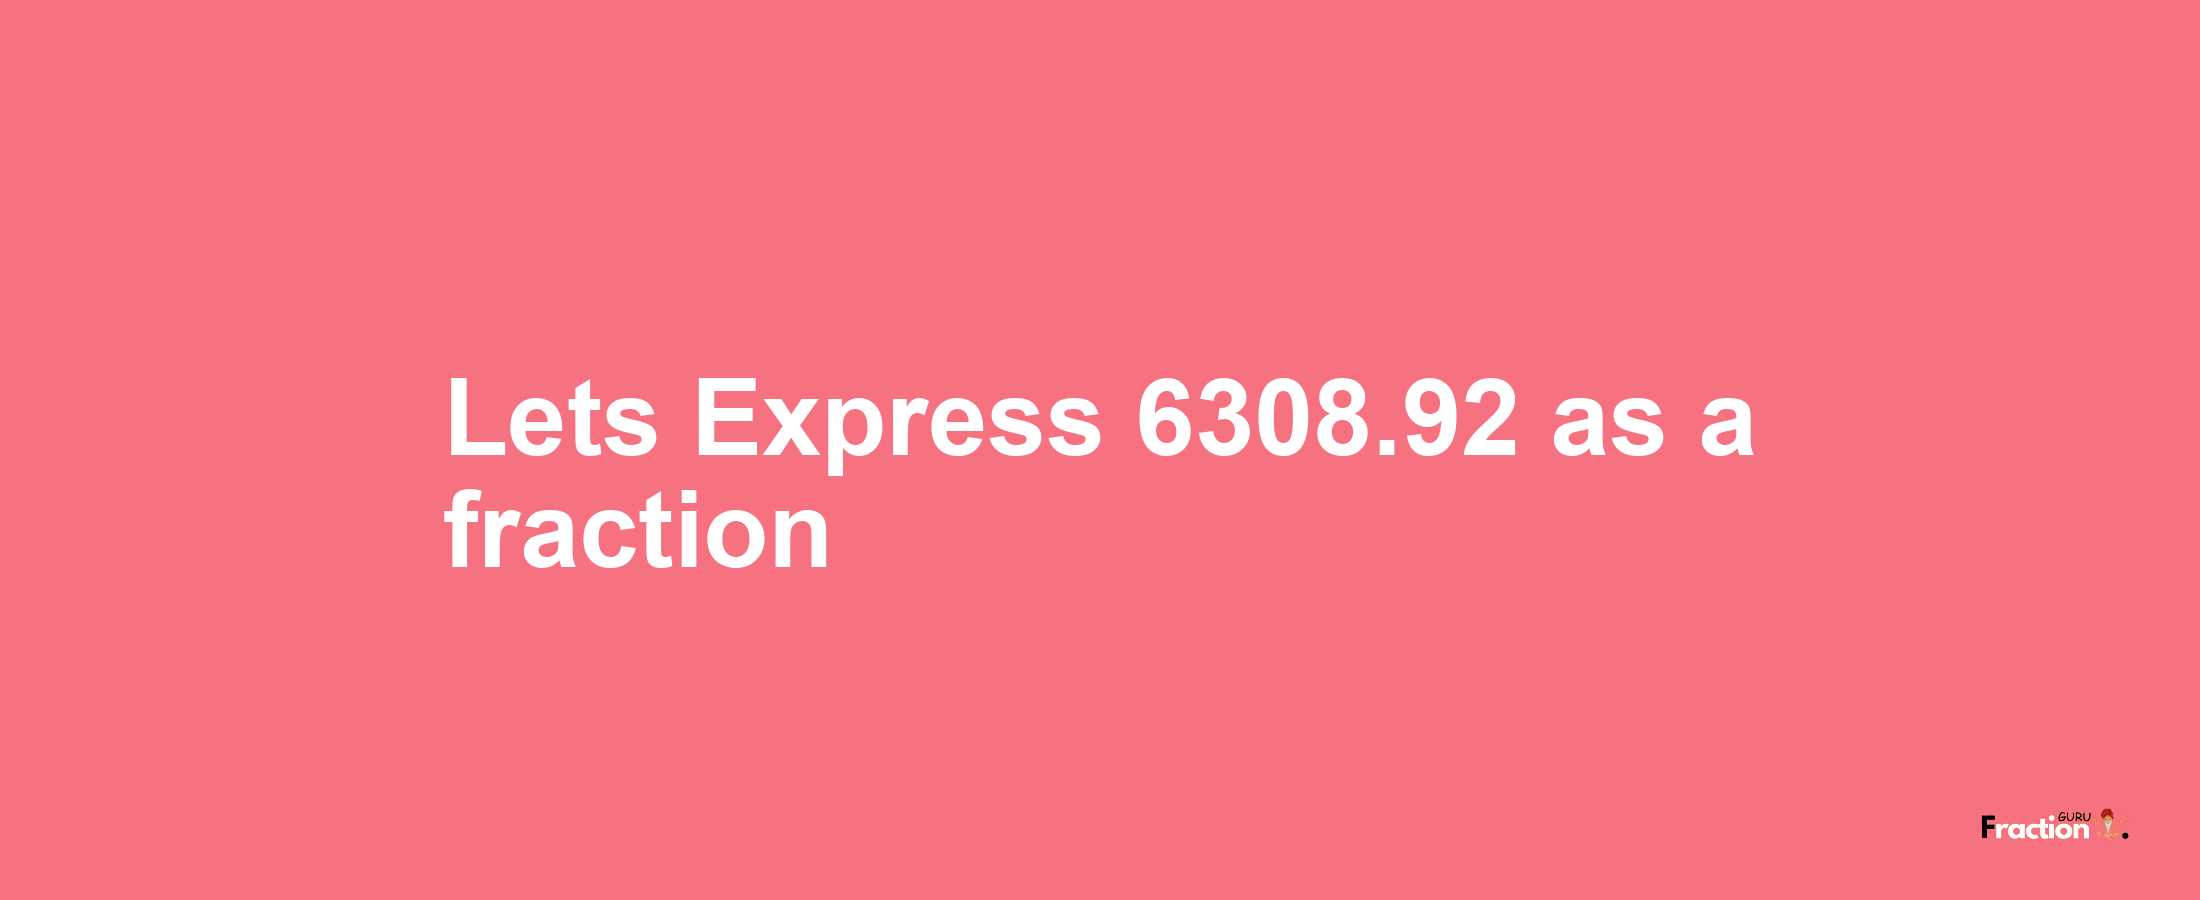 Lets Express 6308.92 as afraction